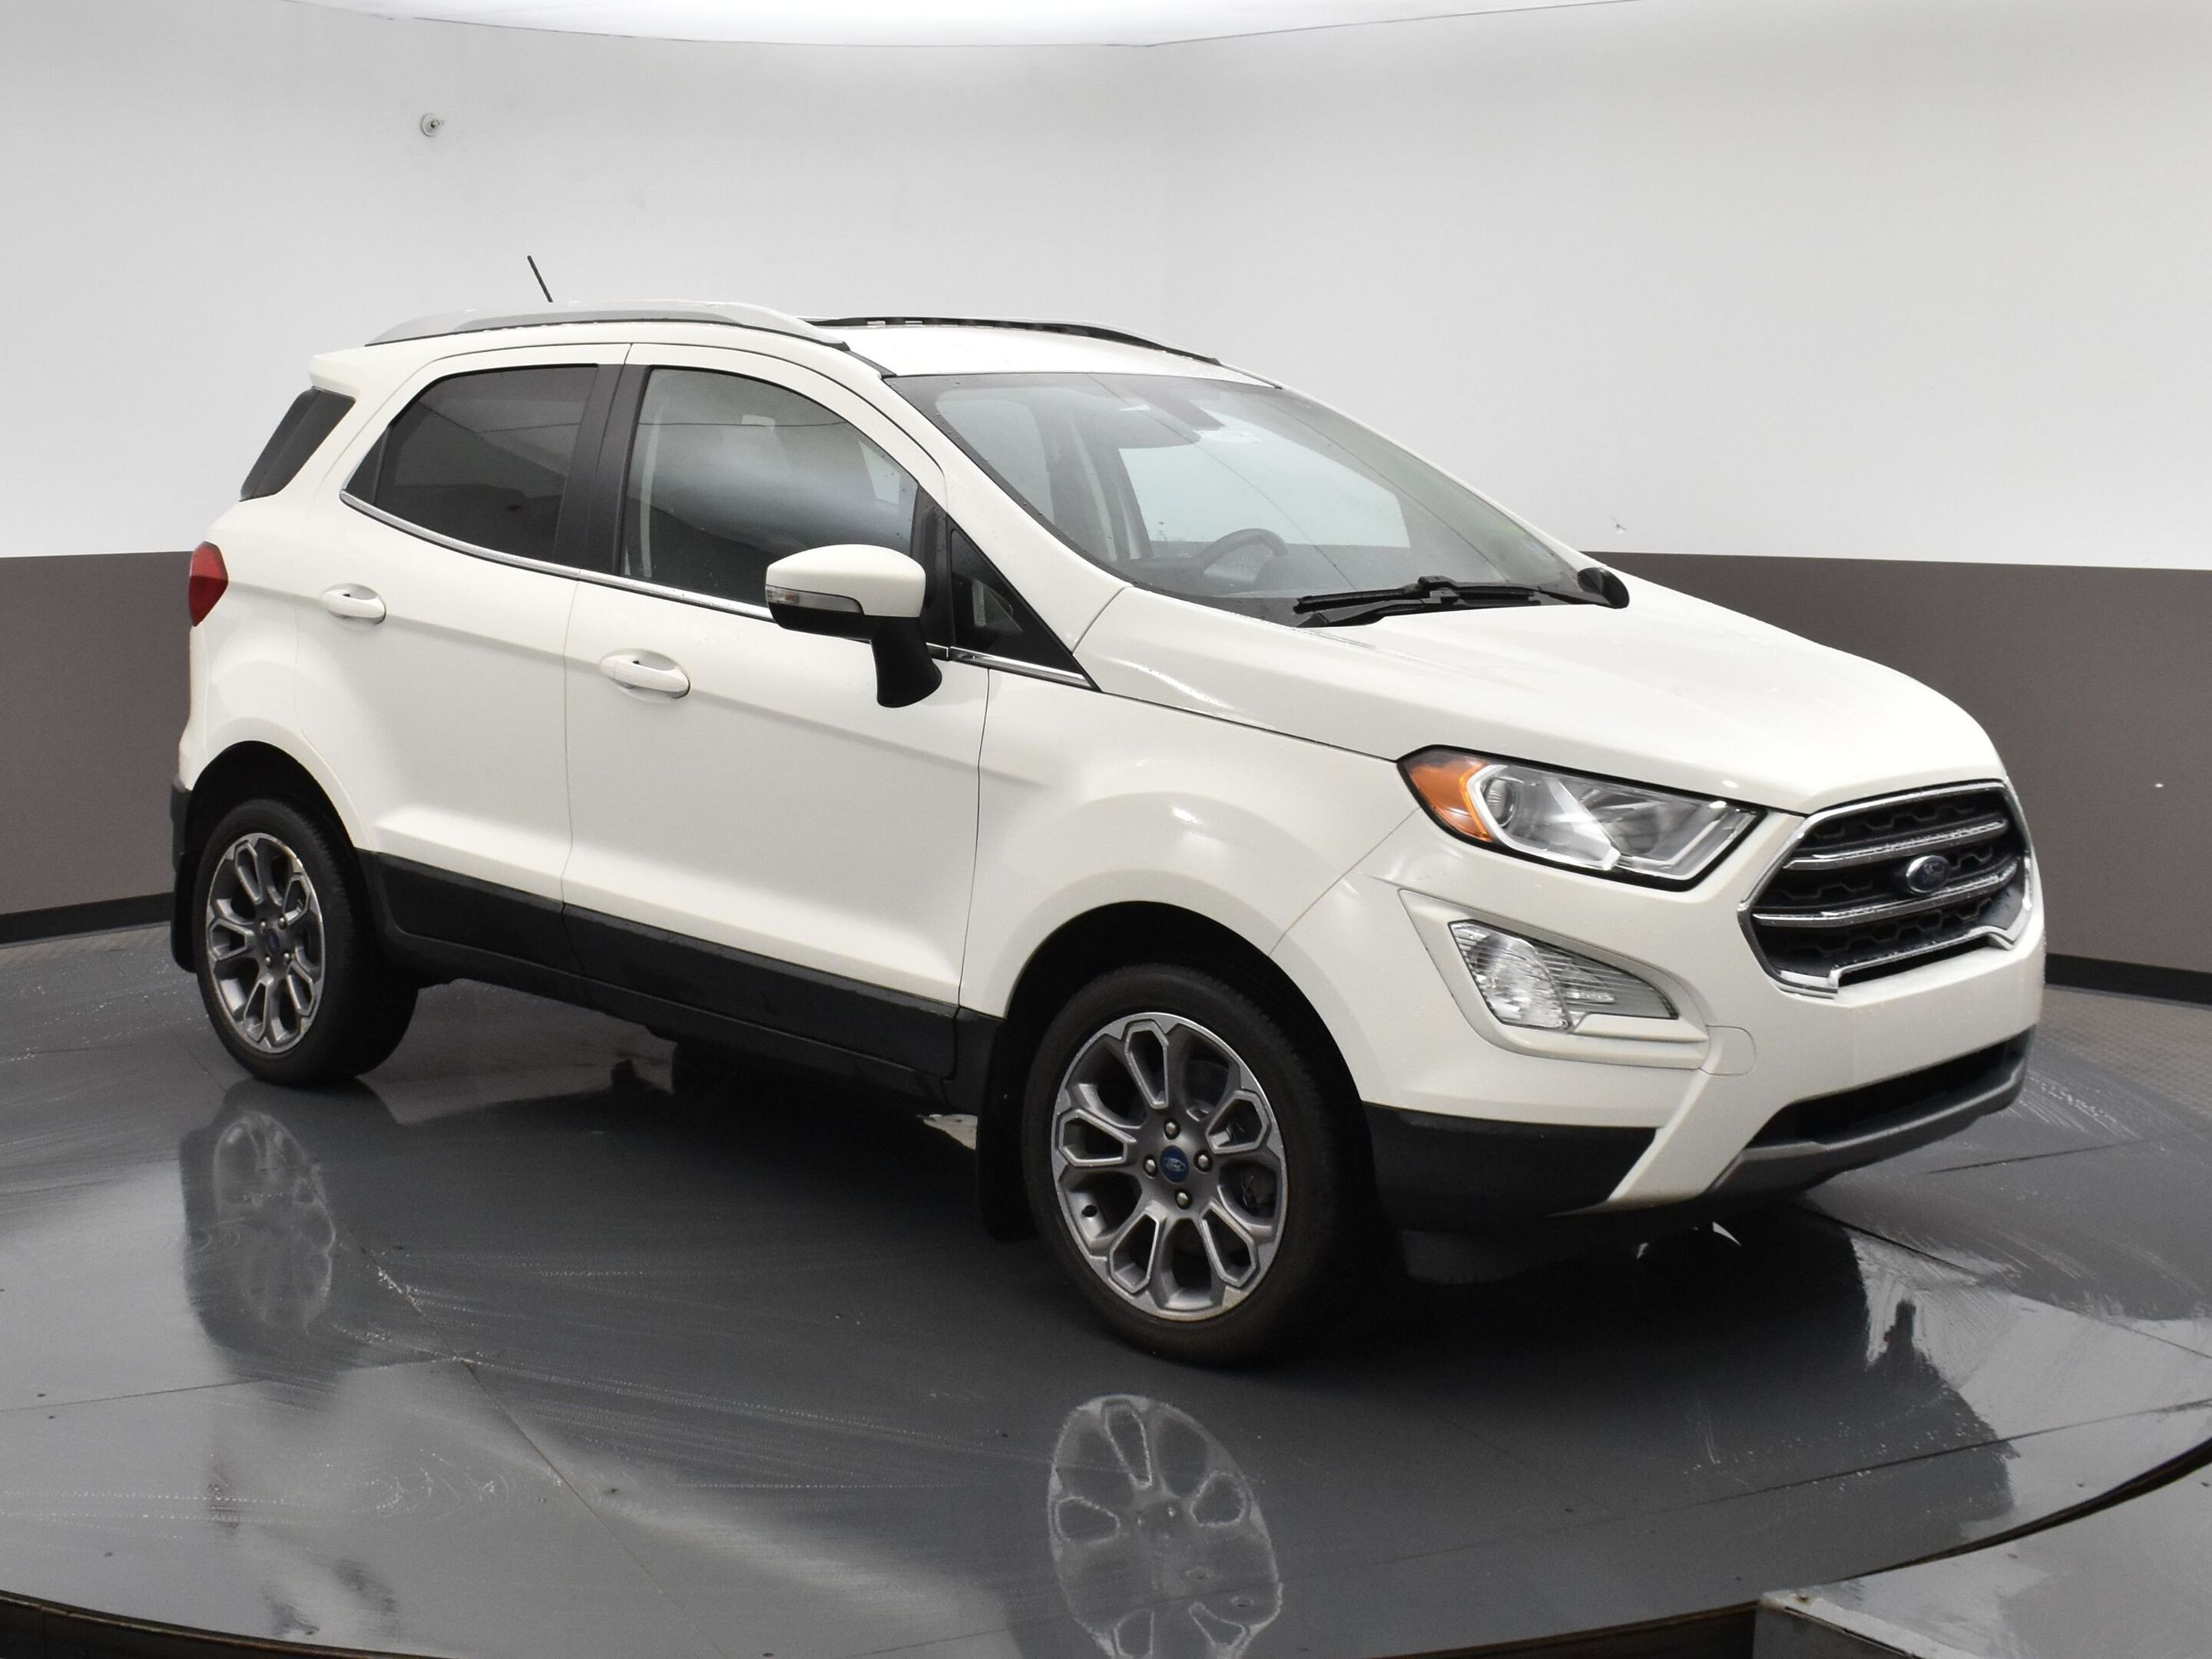 2019 Ford EcoSport TITANIUM 4wd Heated Leather Seats, Navigation,Blin